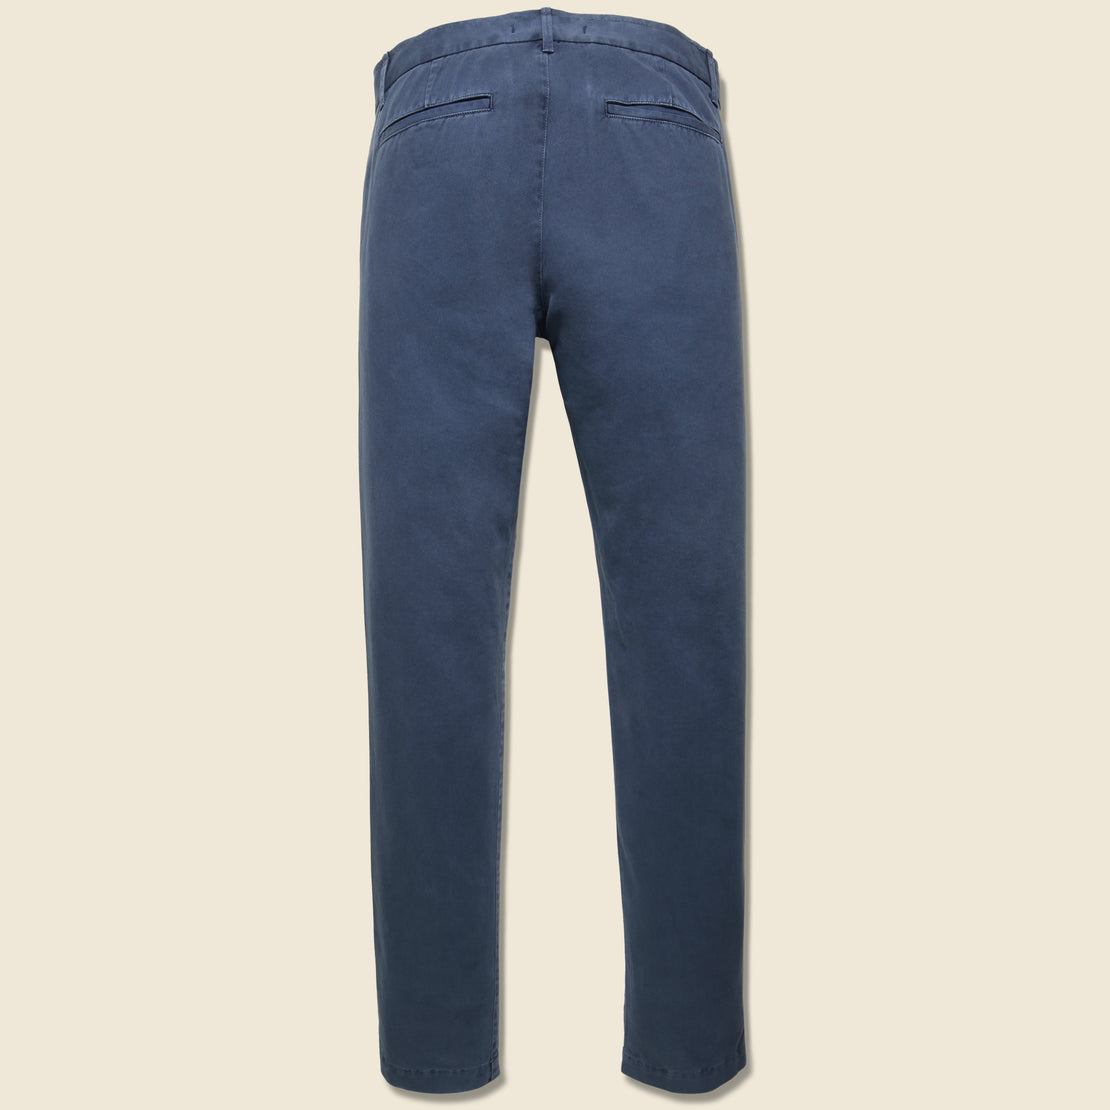 Weekend Chino - Navy - Life After Denim - STAG Provisions - Pants - Twill